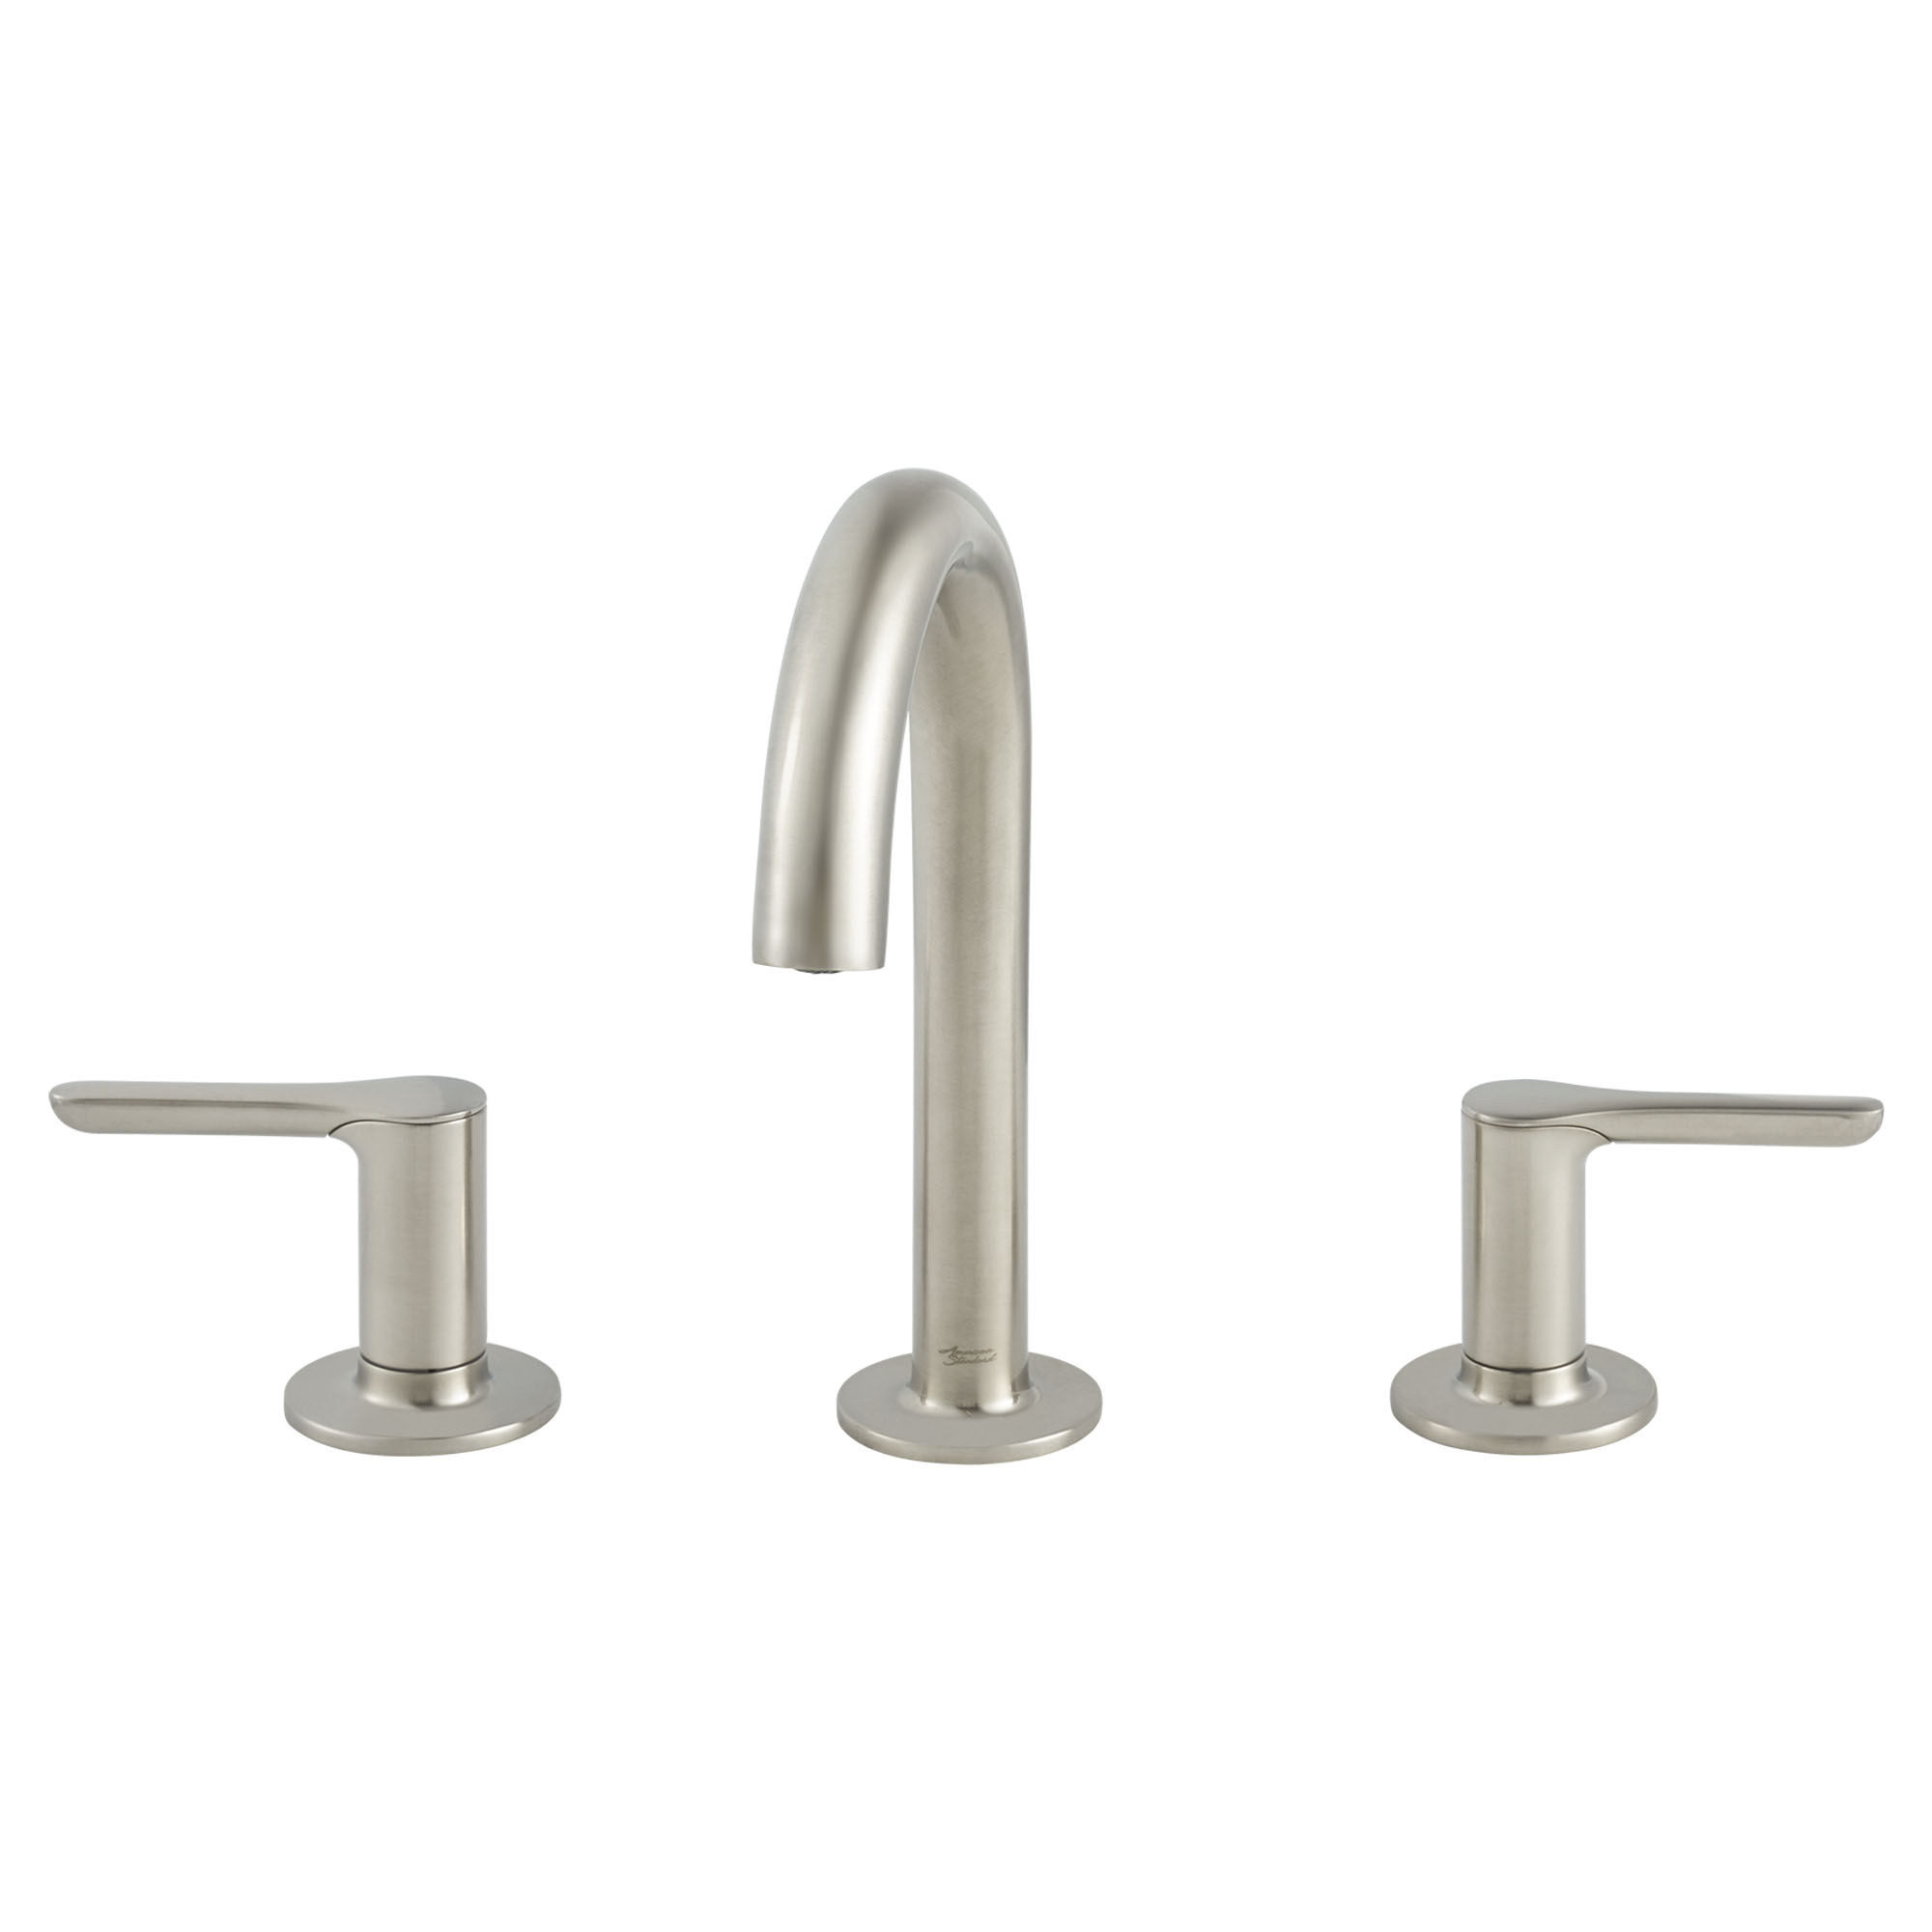 Studio® S 8-Inch Widespread 2-Handle Bathroom Faucet 1.2 gpm/4.5 L/min With Lever Handles